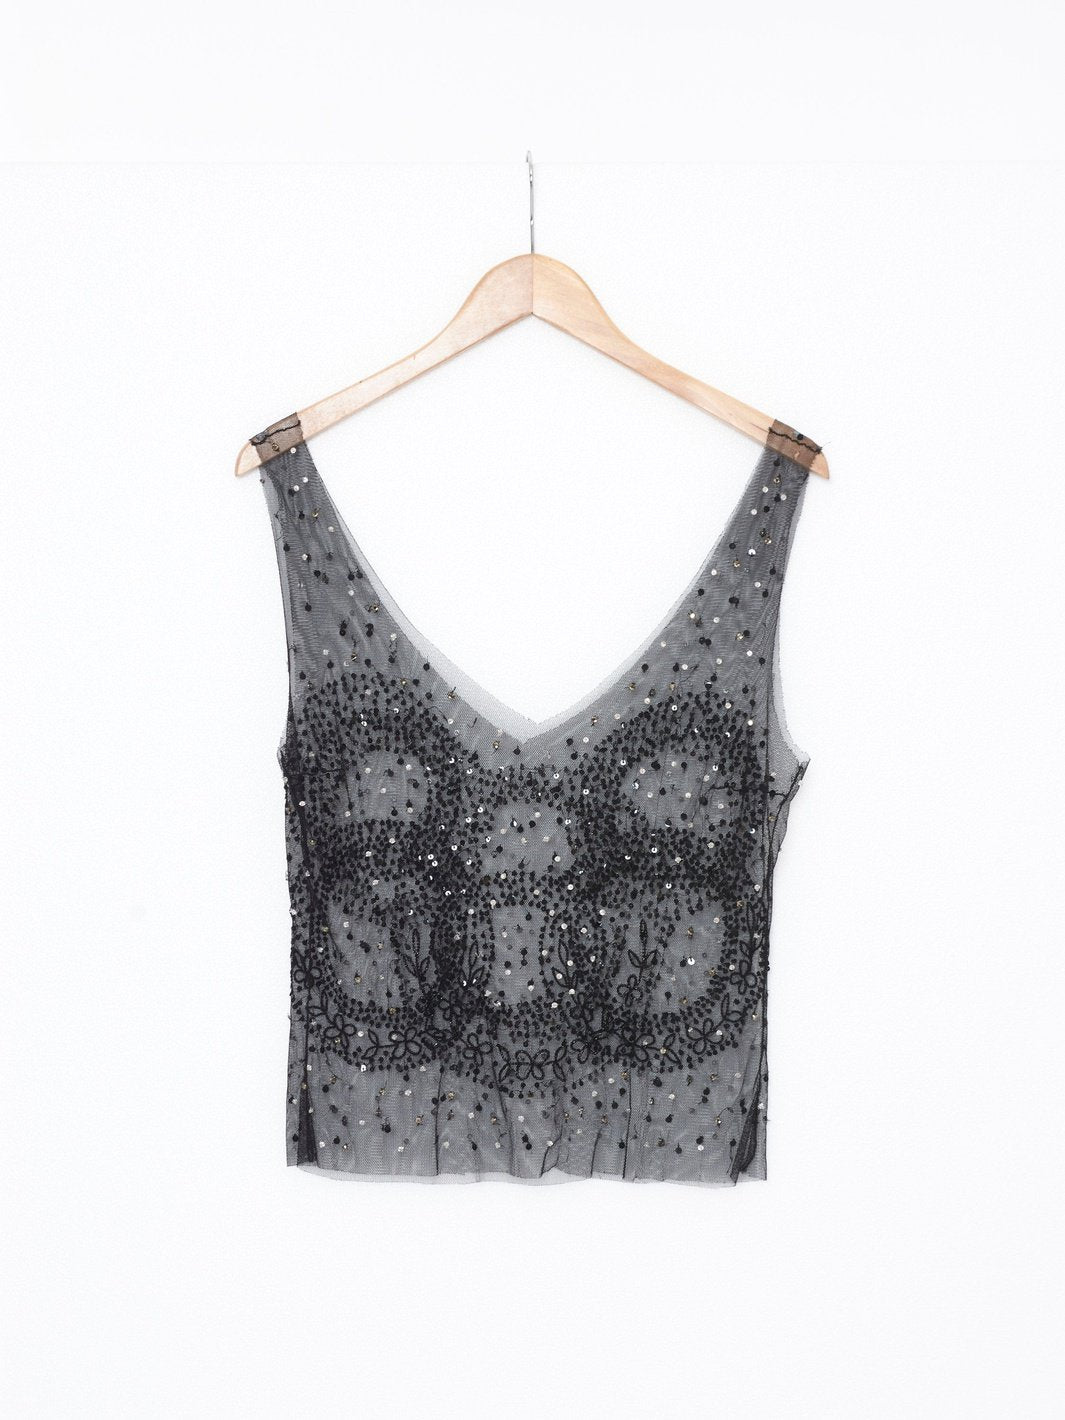 Y2K Krizia sheer black sleeveless top with beads and sequins